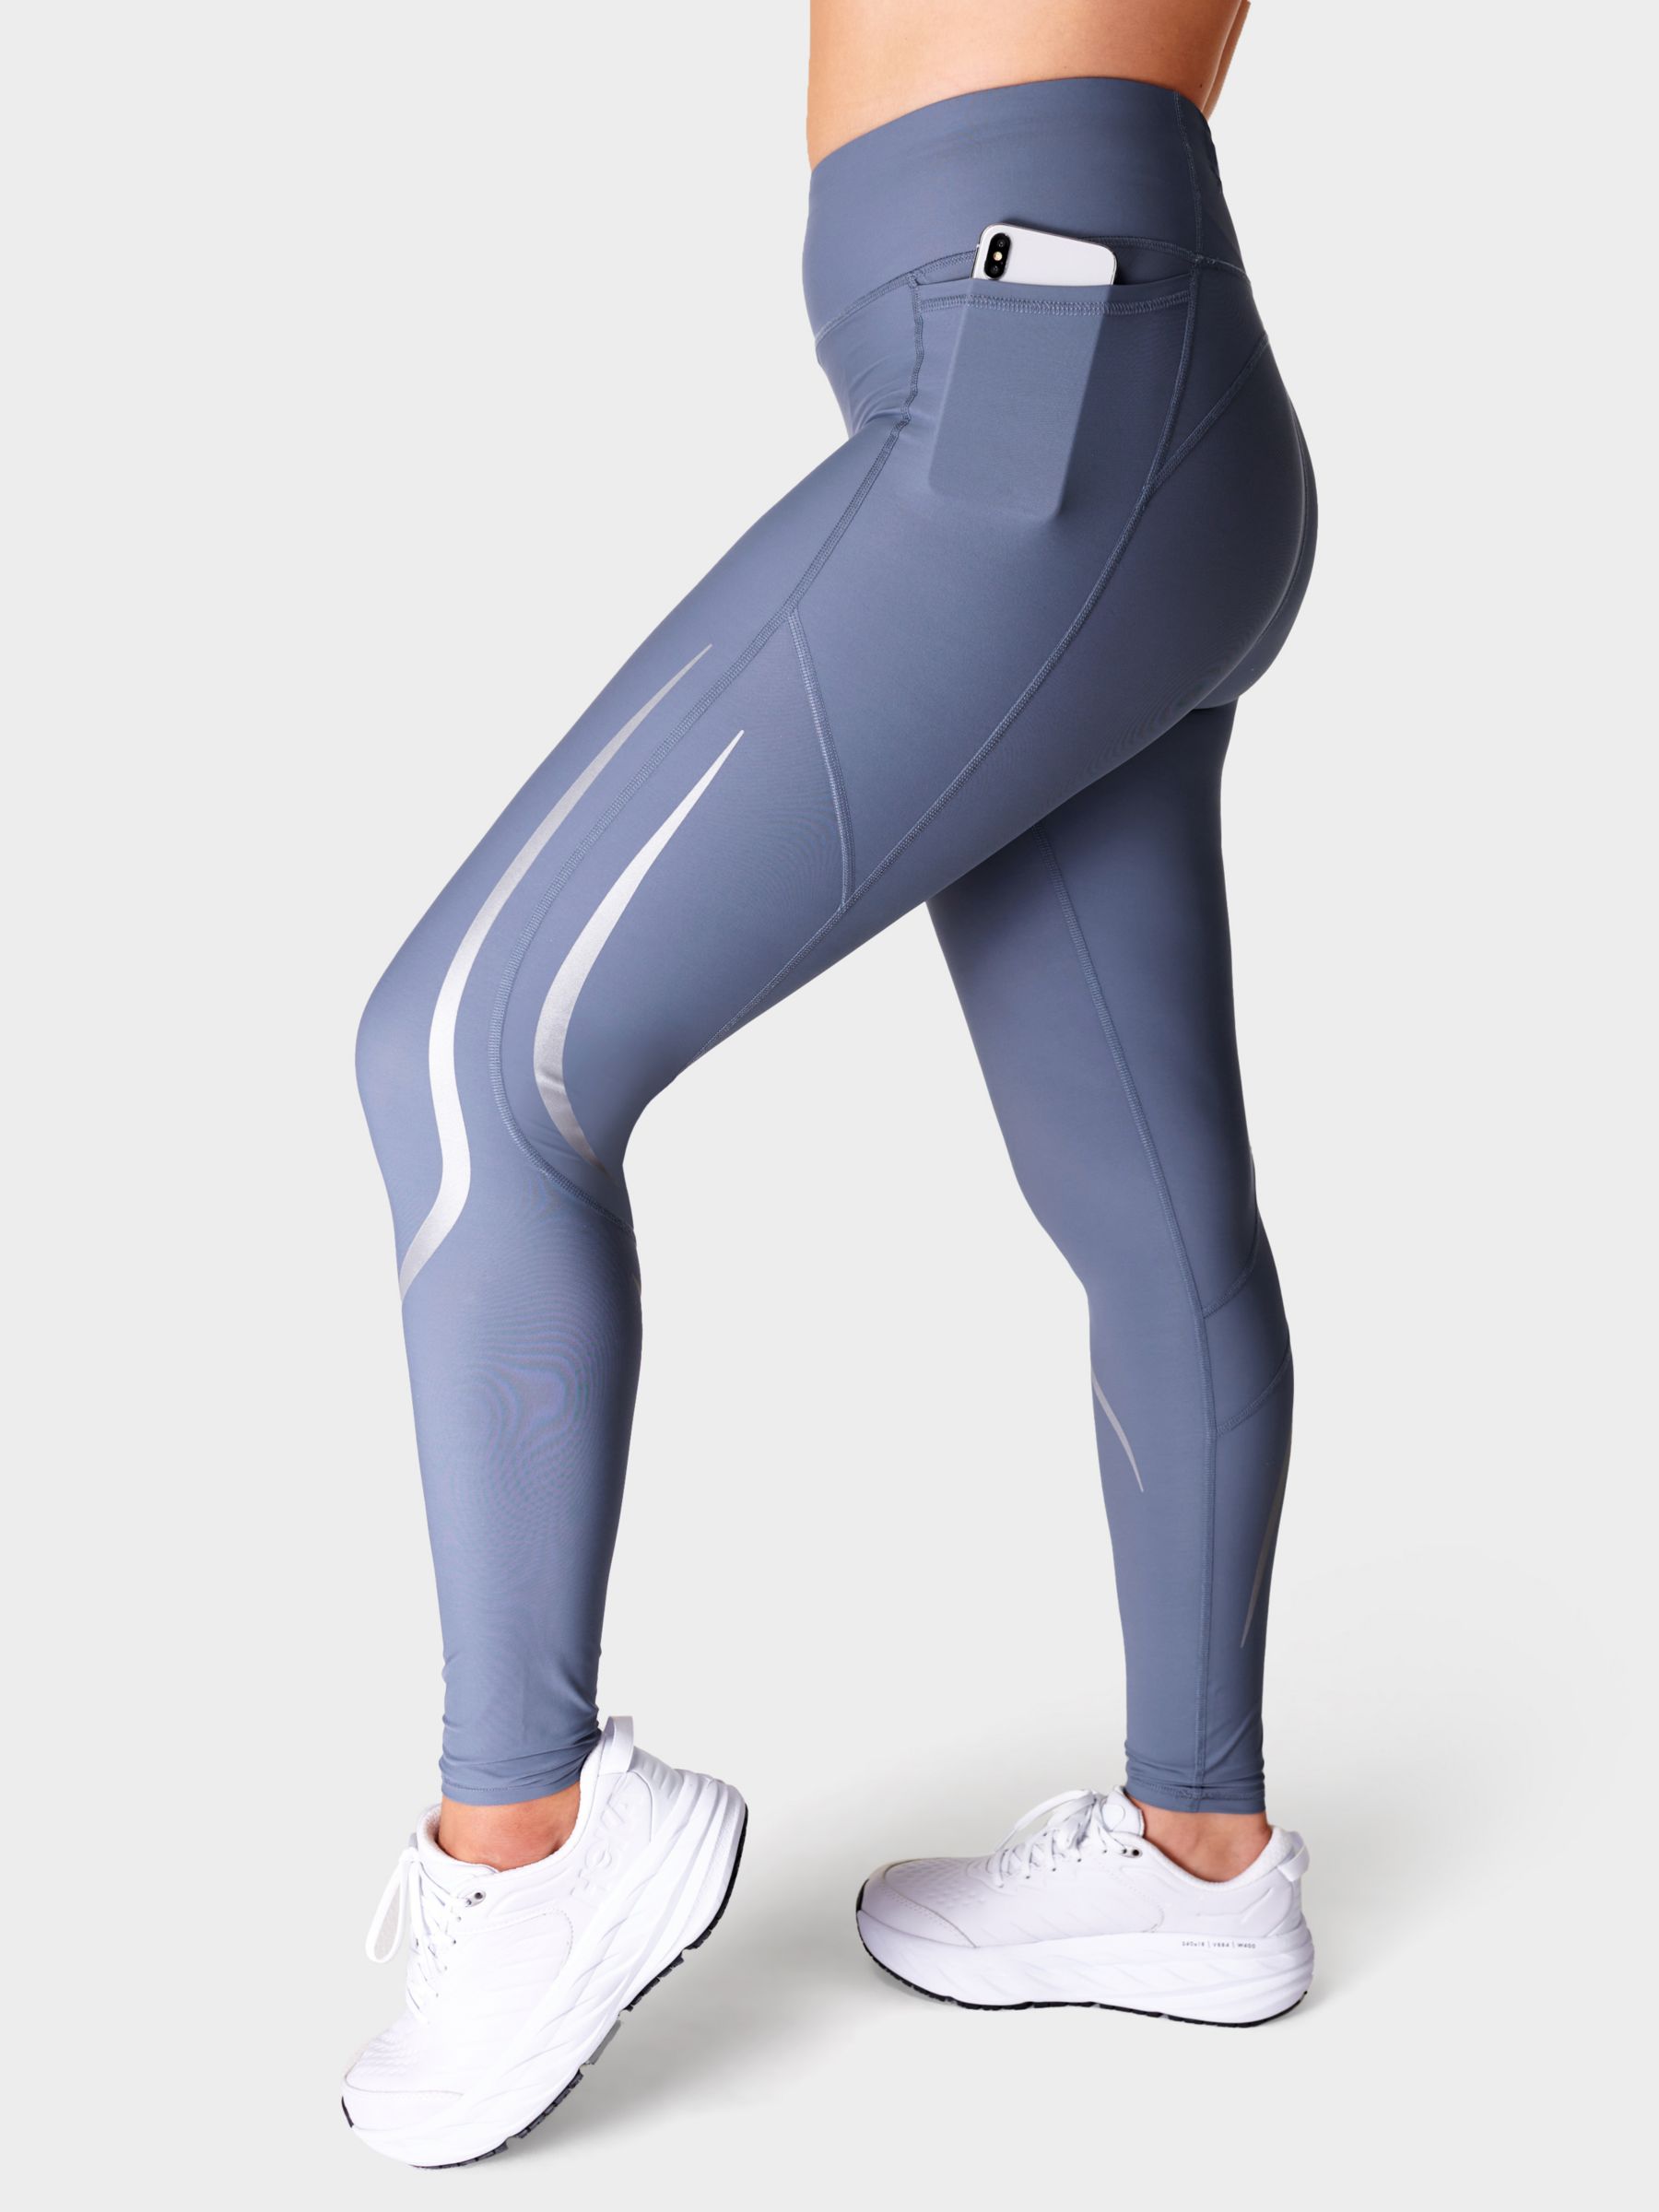 Sweaty Betty Zero Gravity Run Leggings, We Have 4 Very Important Words for  You: Workout Clothes on Sale